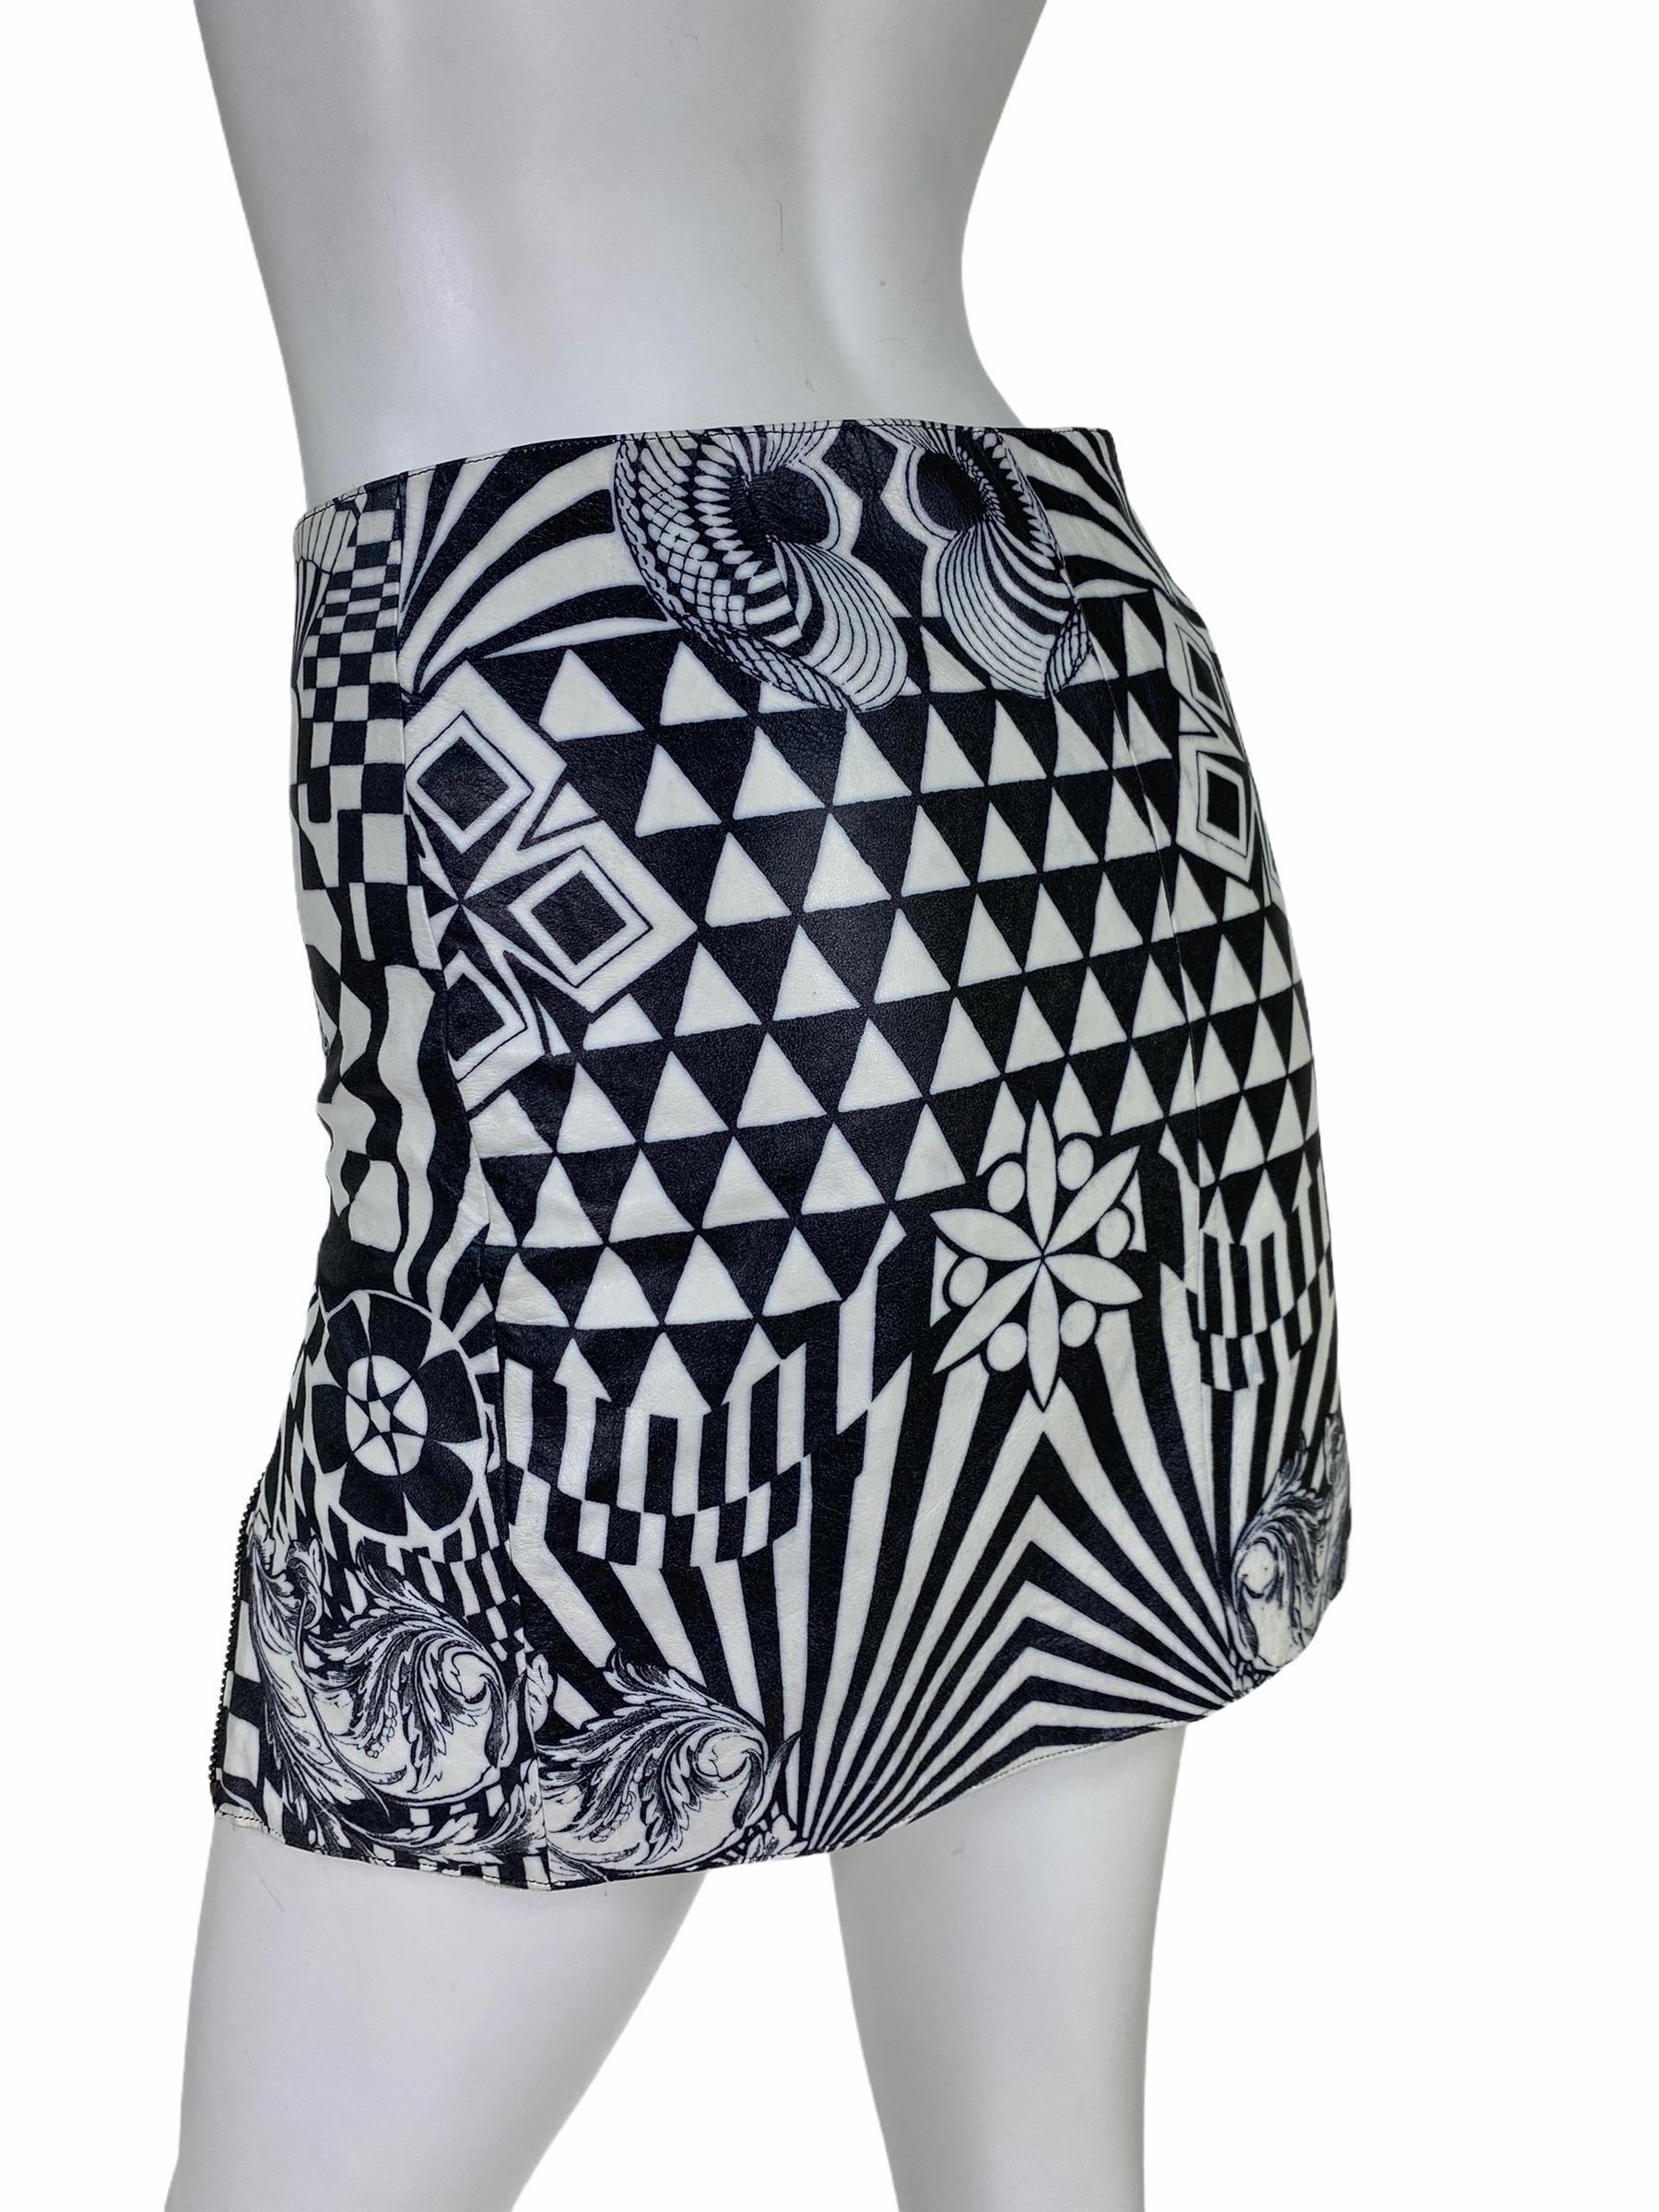 F/W 2001 Versus Versace Black/White Vintage Graphic Tattoo Leather Skirt  In Excellent Condition For Sale In Montgomery, TX